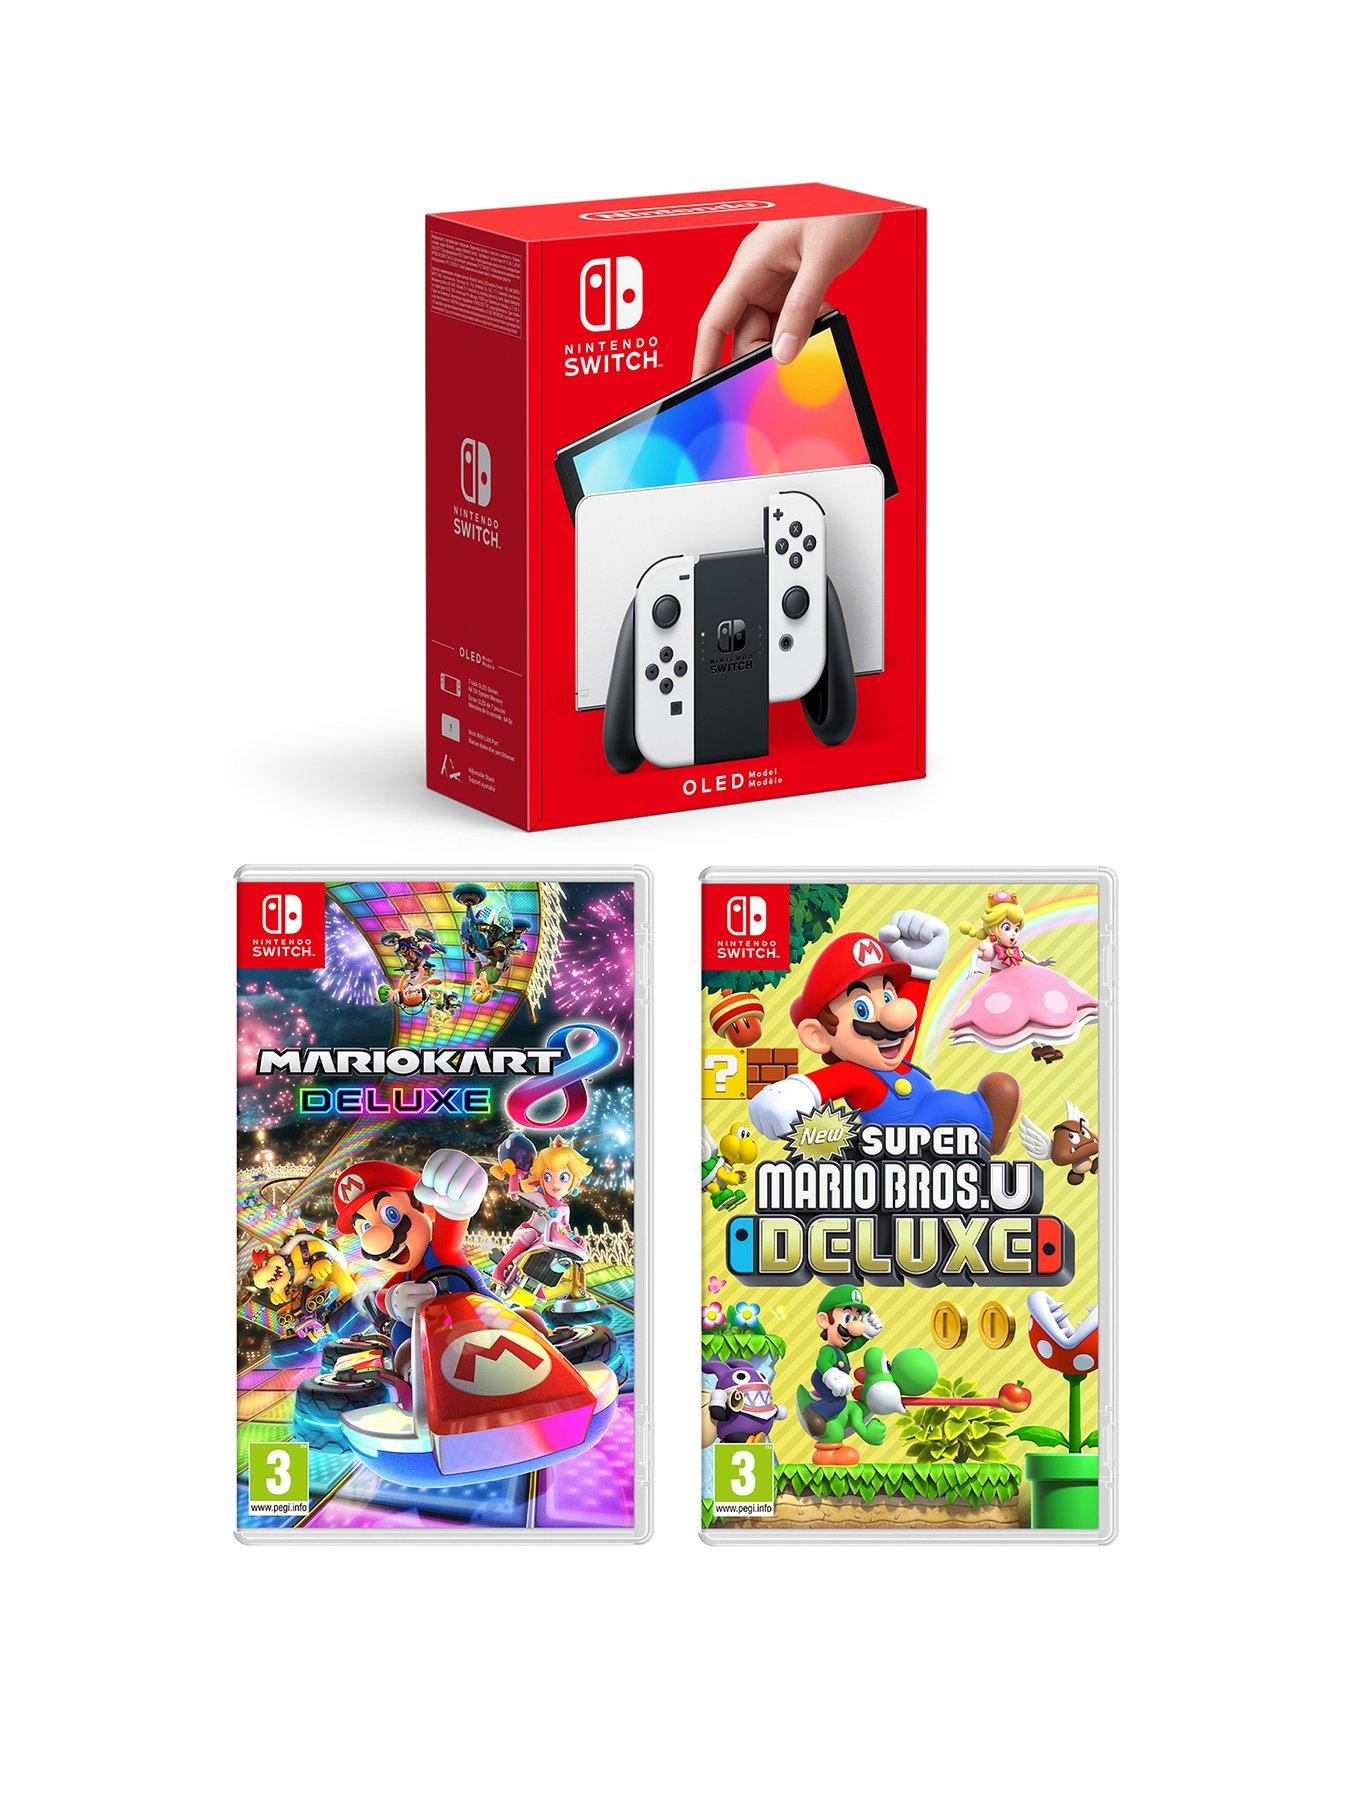 Nintendo Switch Oled Oled Console White With Mario Kart 8 And New Super Mario Bros U Deluxe